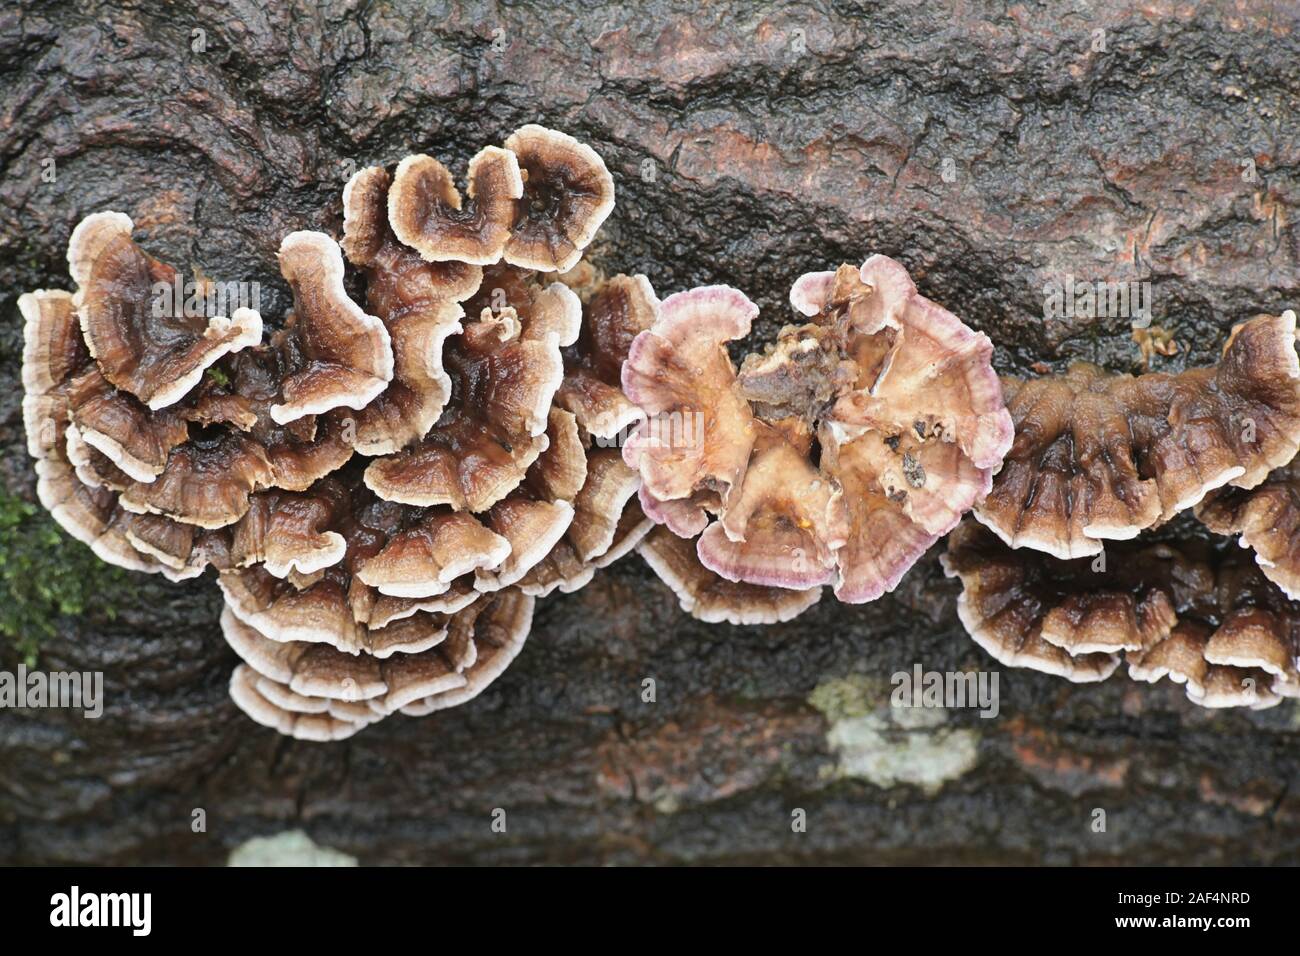 Chondrostereum purpureum, known as Silver leaf fungus, wild mushrooms from Finland. Stock Photo